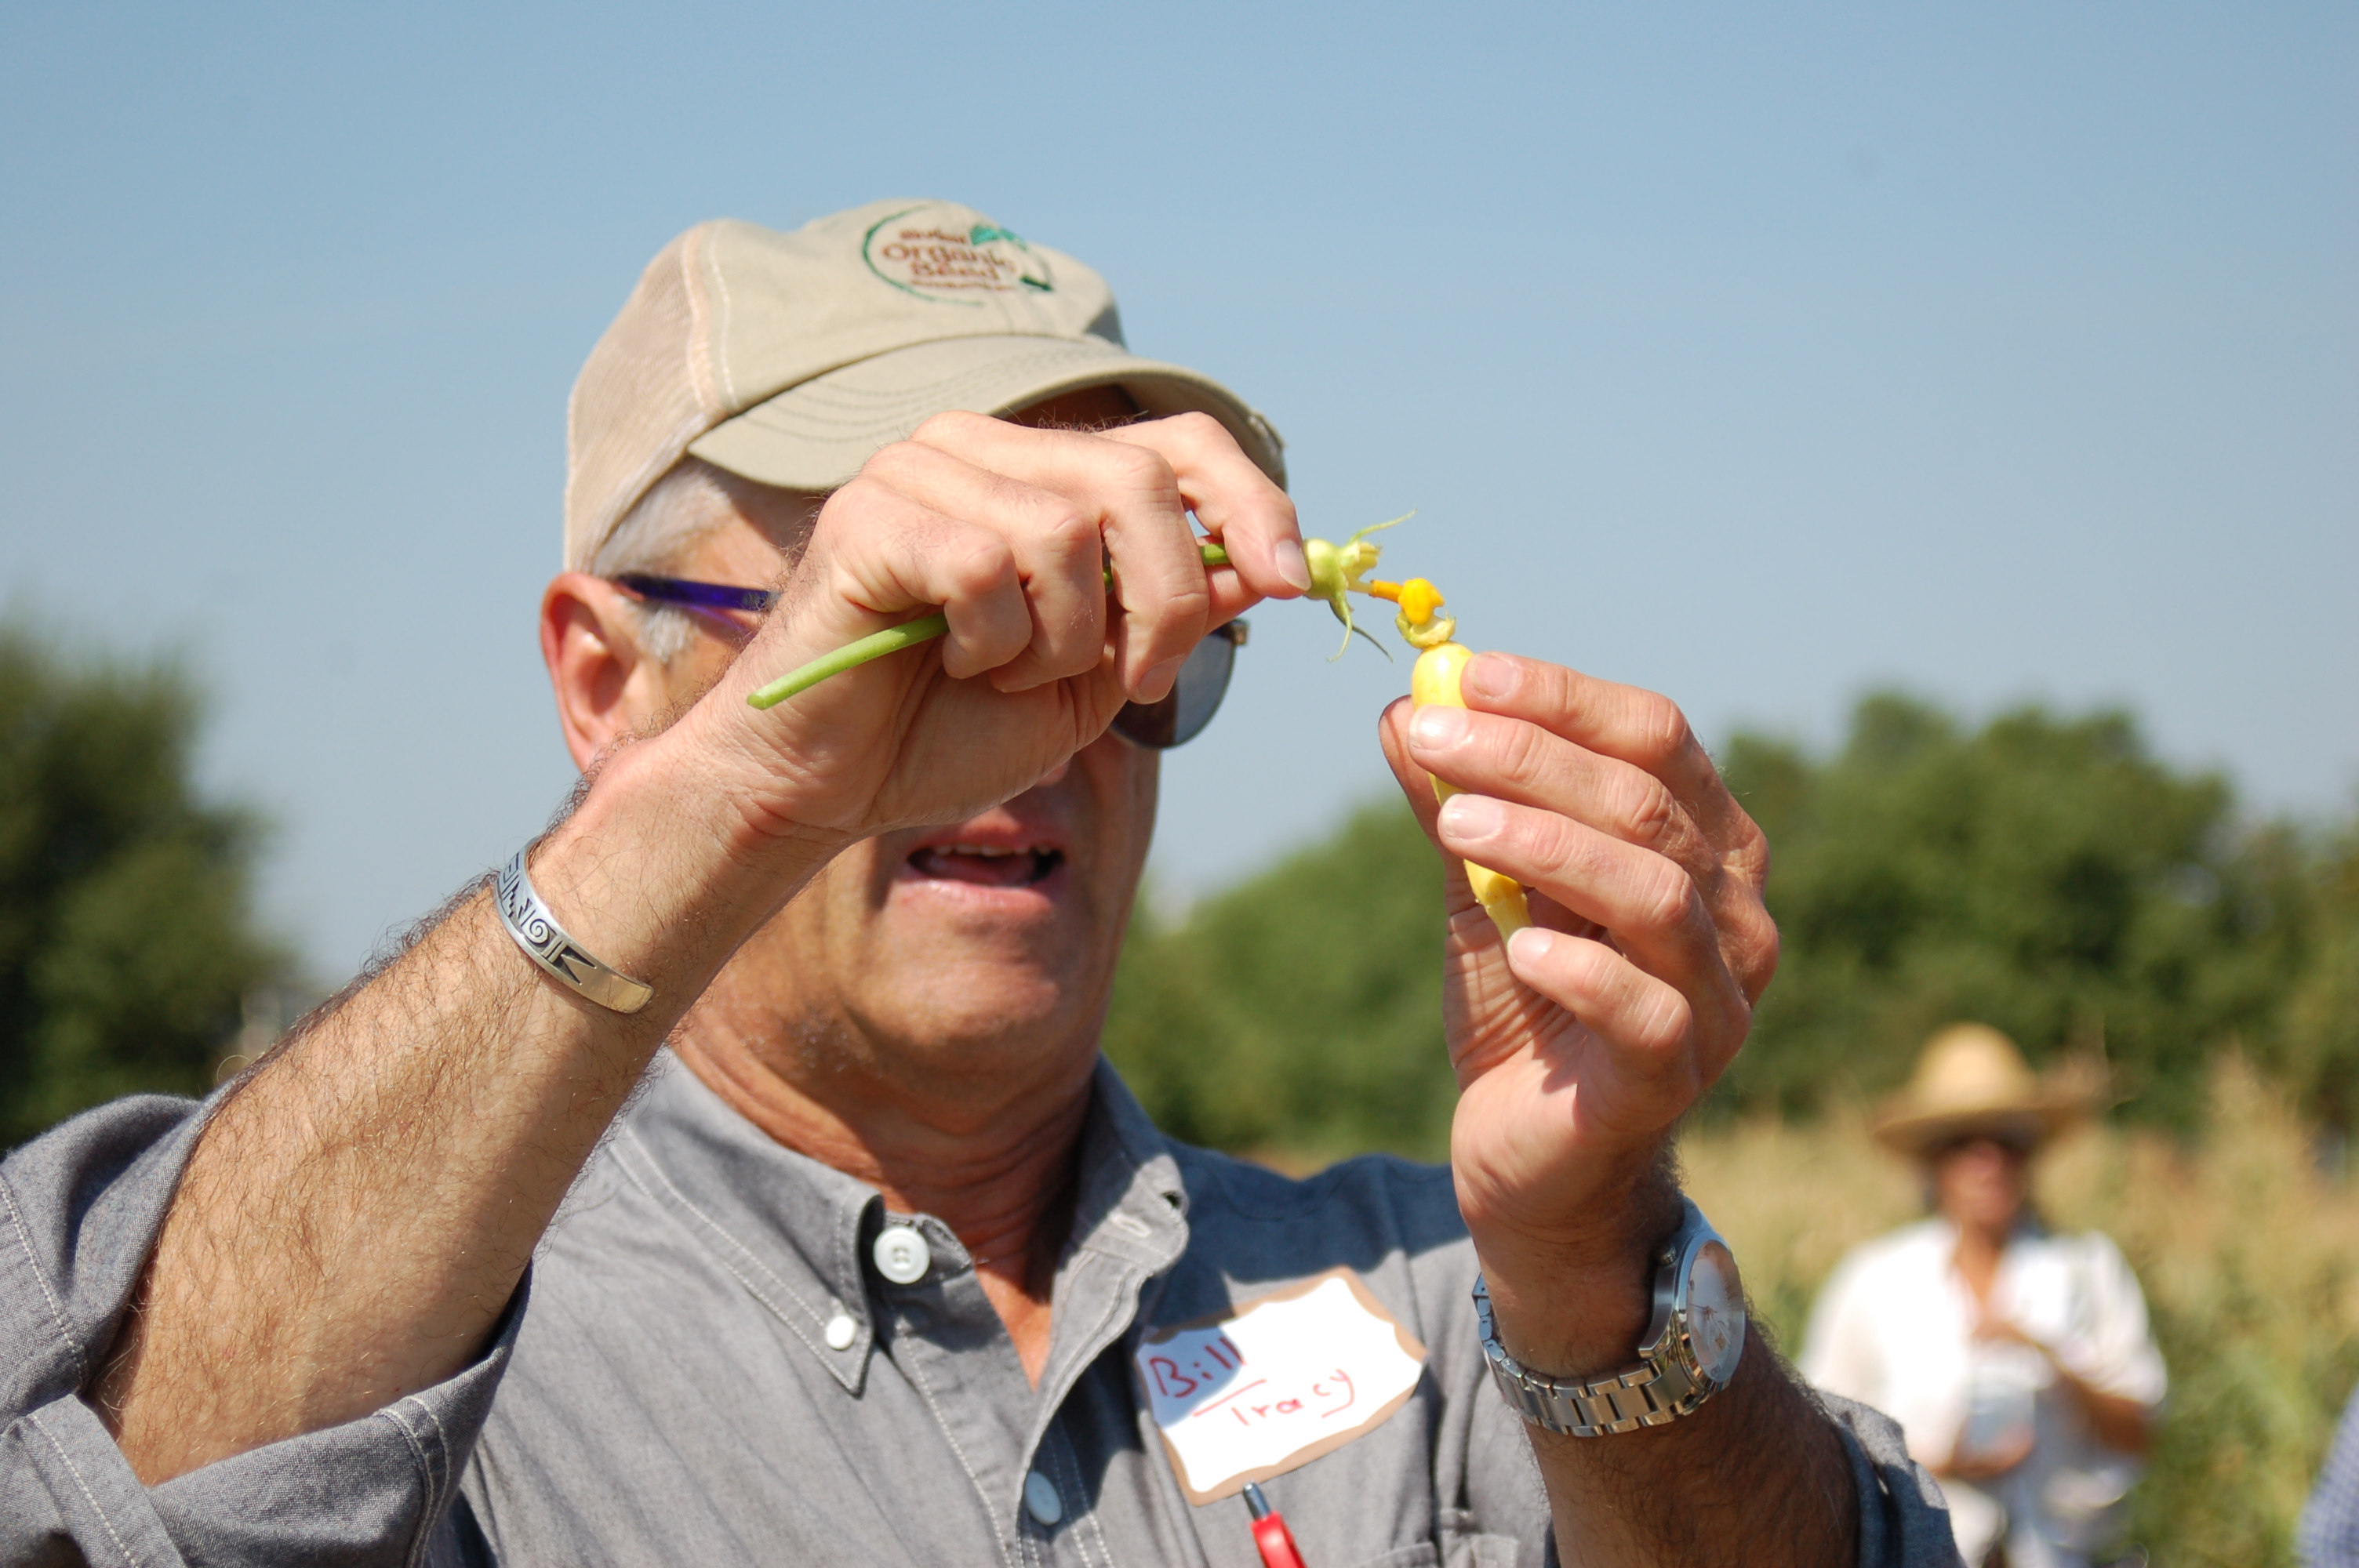 University of Wisconsin - Madison's Bill Tracy discusses pollination at a seed intensive hosted by the University of California - Davis and Organic Seed Alliance